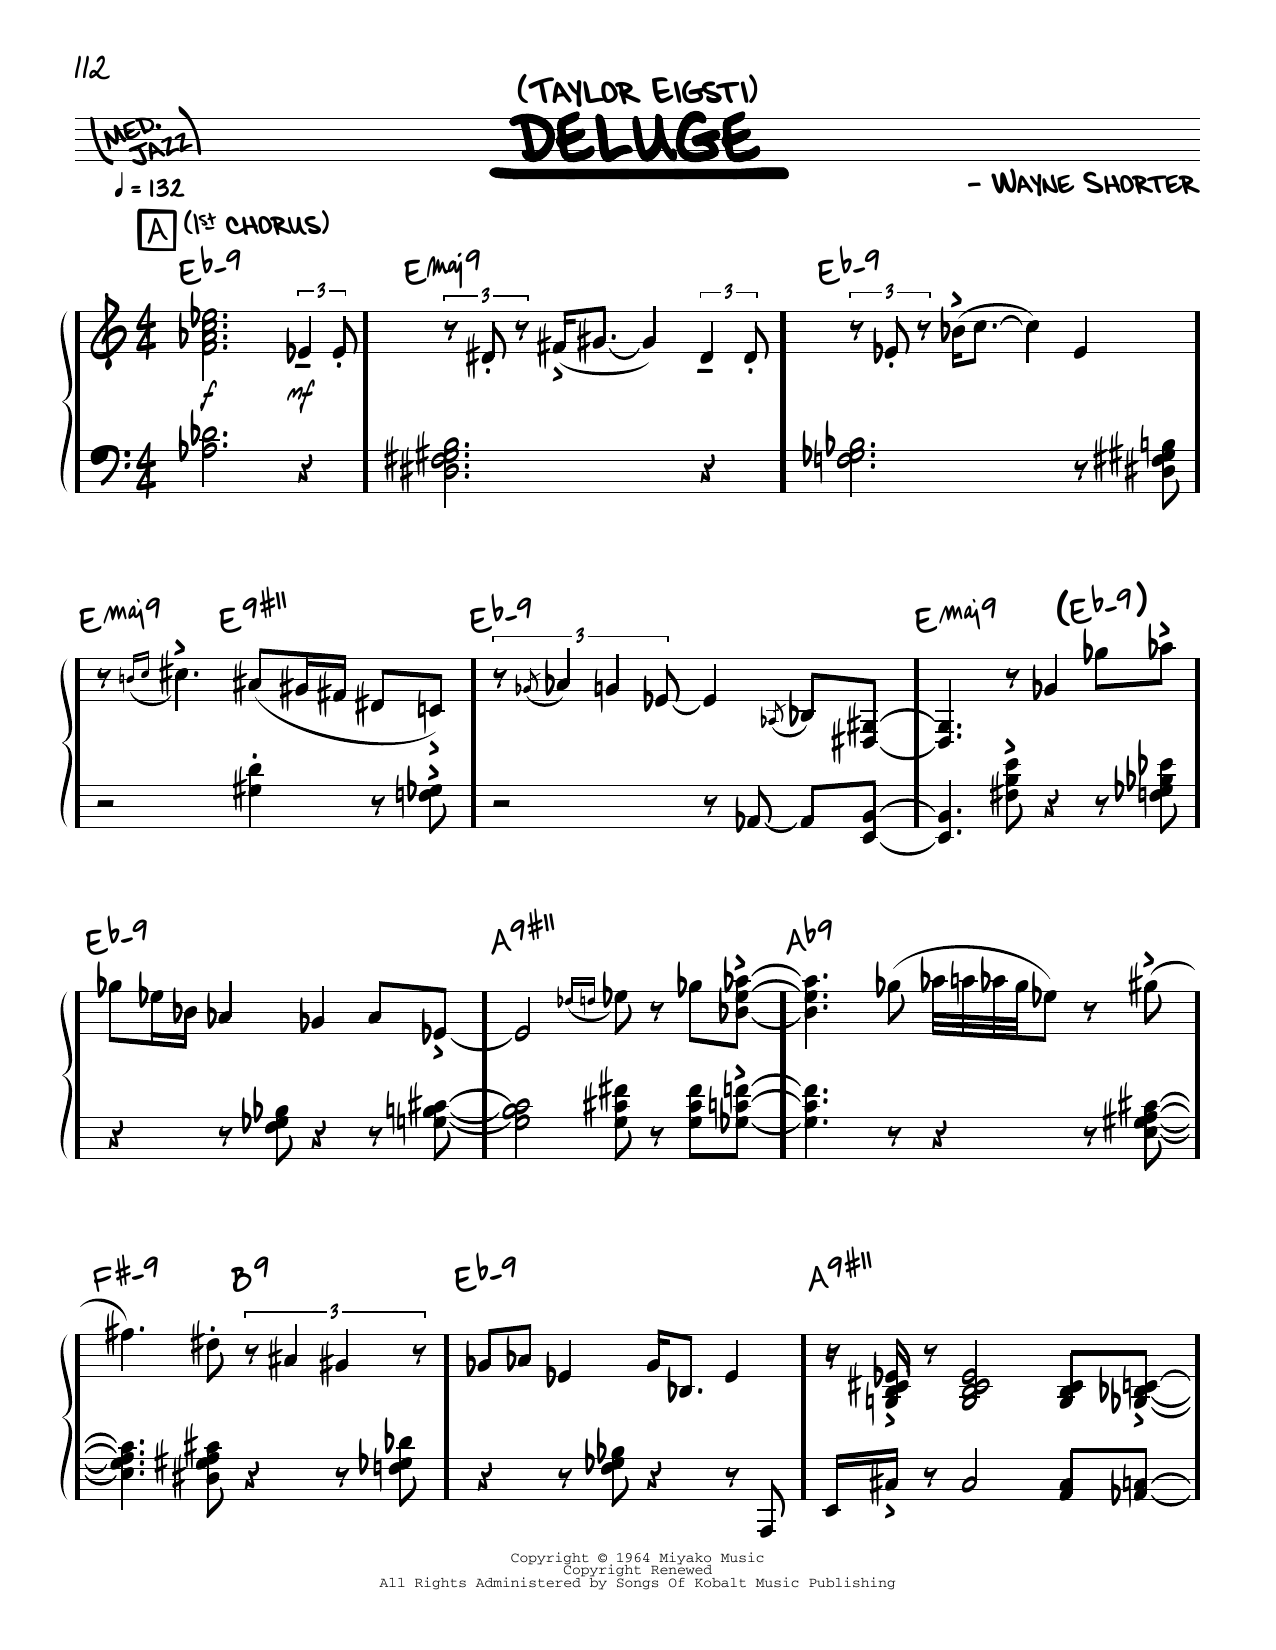 Download Taylor Eigsti Deluge (solo only) Sheet Music